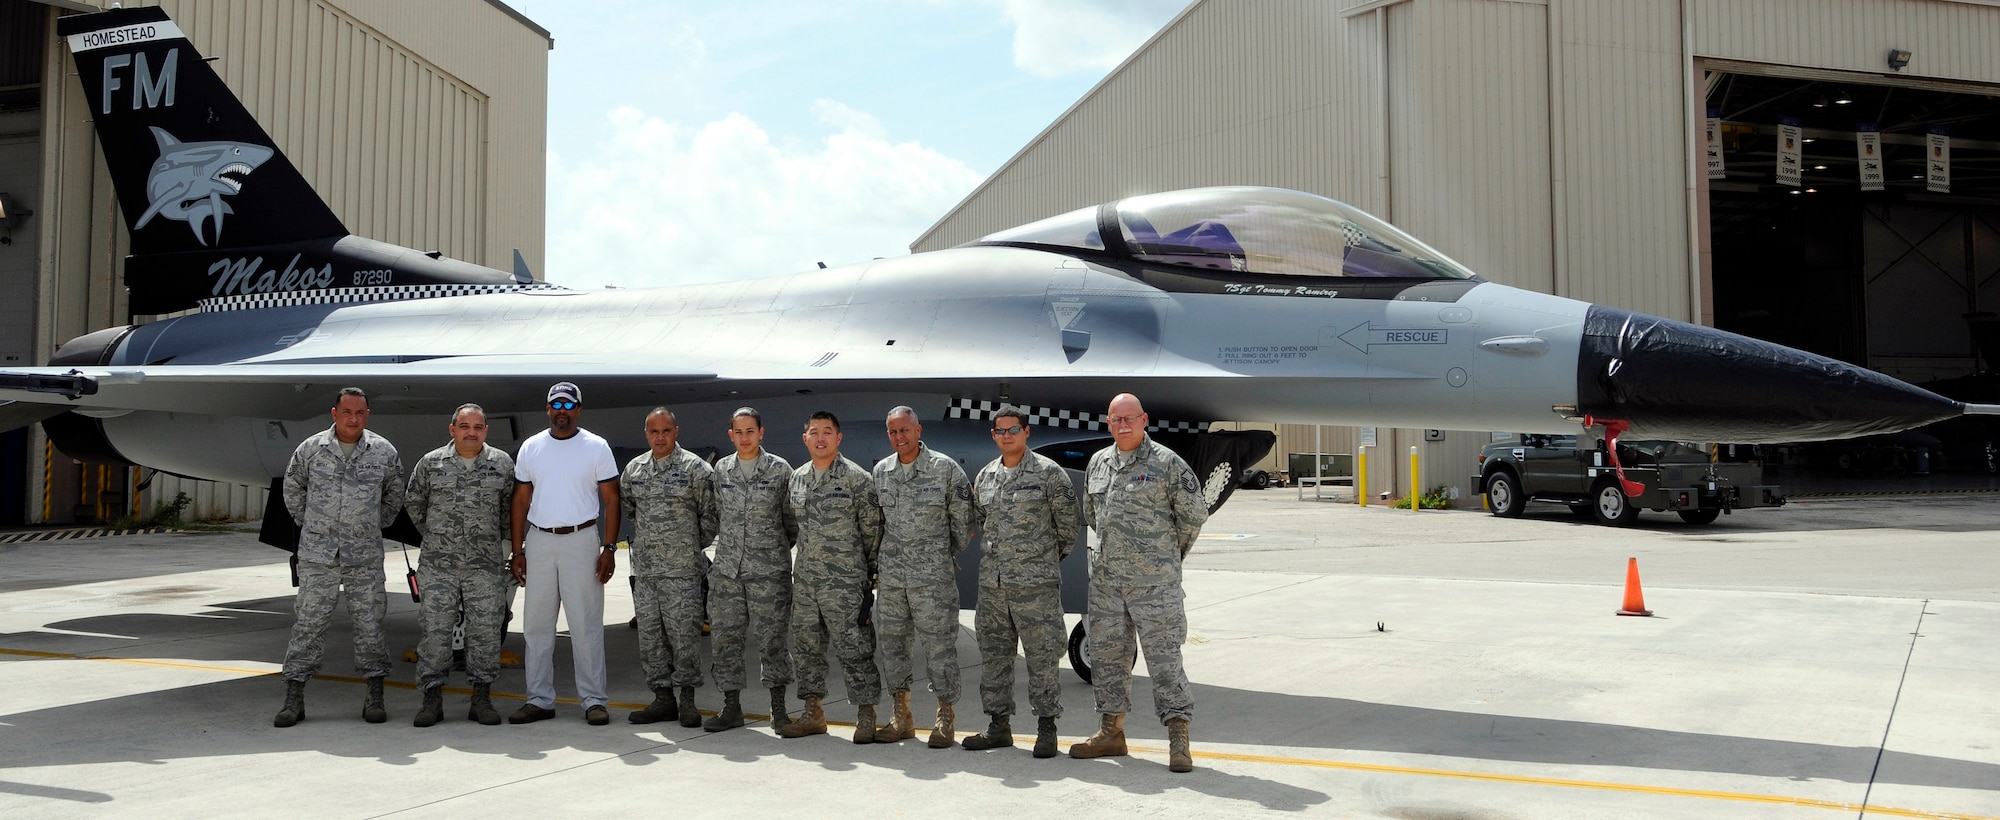 Personnel from the 482nd Maintenance Squadron Fabrication Section stand in front of aircraft number 209 after painting the distinctive tail art on June 29. The 482nd Fighter Wing “Mako’s” branded its image with distinguishable tail art for the wing’s flagship F-16 aircraft. The distinct aircraft markings are a first for Homestead Air Reserve Base and will serve as reminder of the strength, pride and perseverance of the 482nd FW. (U.S. Air Force photo/Senior Airman Lou Burton)